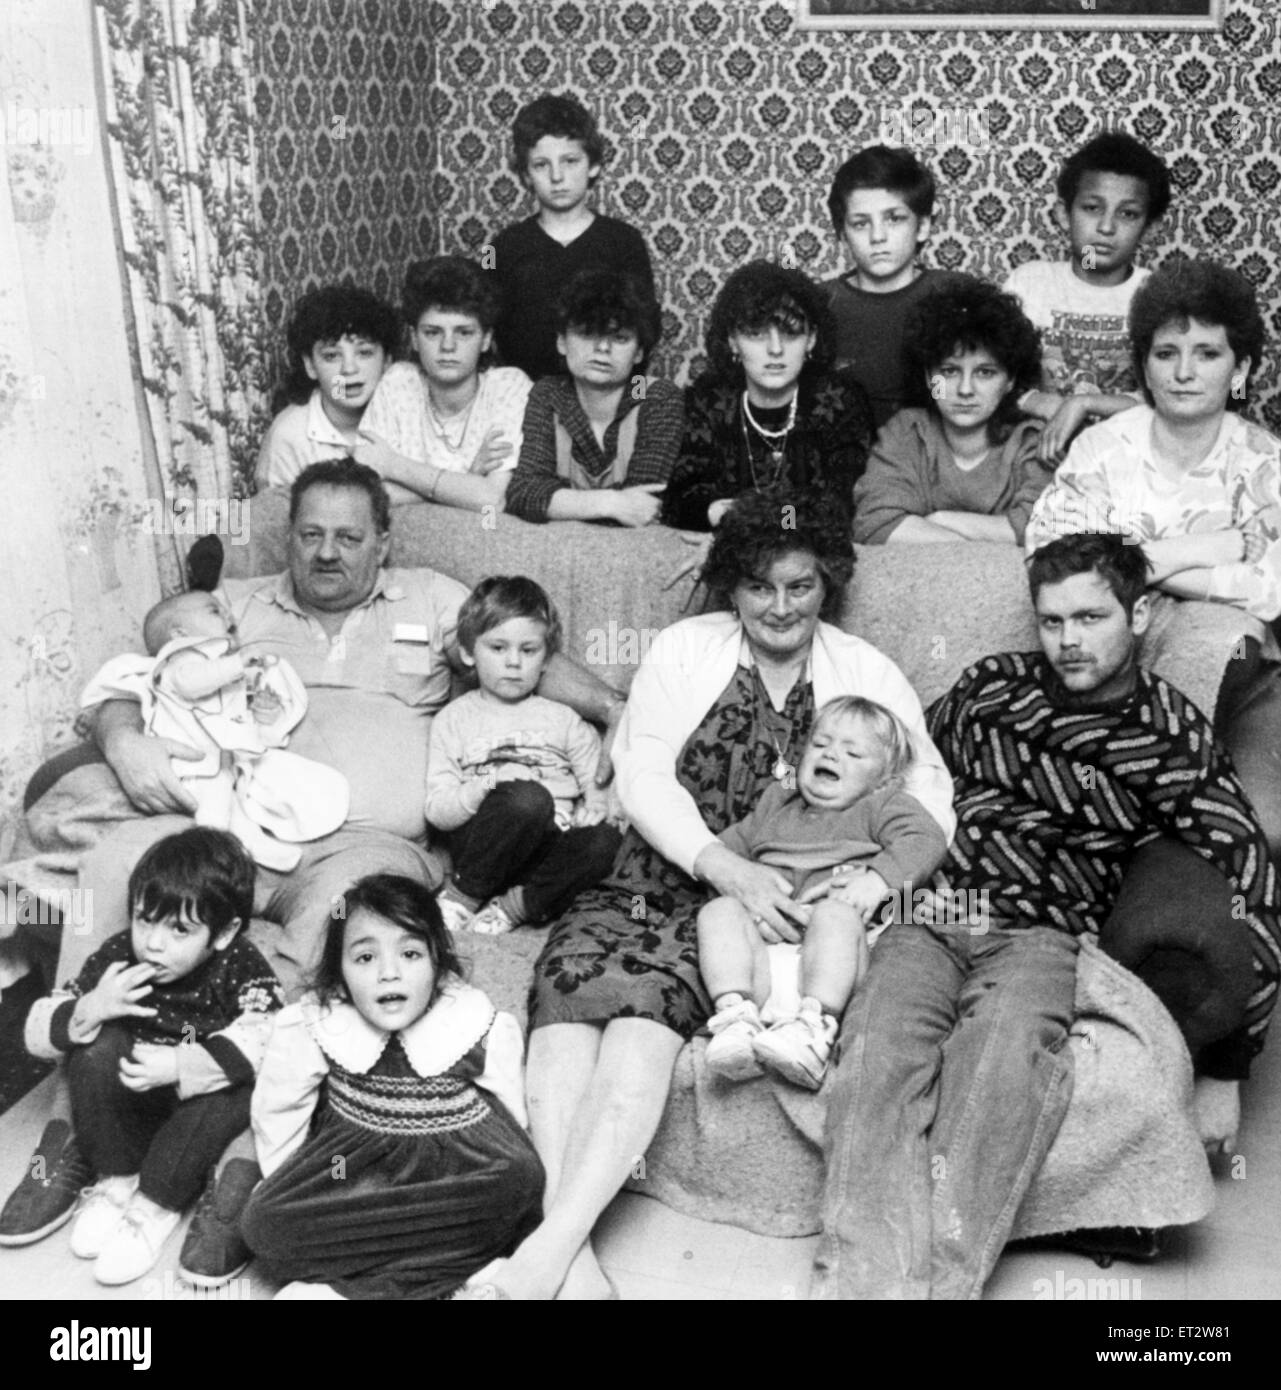 The Attard Family, 3rd February 1987. The family of 17, 7 adults and 10 children, live together in a four bedroom council house on the Trowbridge Estate in Cardiff. The family, grand parents Charlie 51 and Jenny Attard, 10 of their children and 5 grandchildren have chosen to live together for the last few years. Pictured, Charlie and Jenny, with daughter Evelyn Davies 31 and her children Nadia 5, Omar 4, daughter Connie Bugeja 26 and children Danny 4 and Anton 3 months, daughters Stella 22, who is 8 months pregnant, Anna 19, Odette 17 and Susan 12 and sons Edmund 23, Joseph 15, Gareth & David Stock Photo